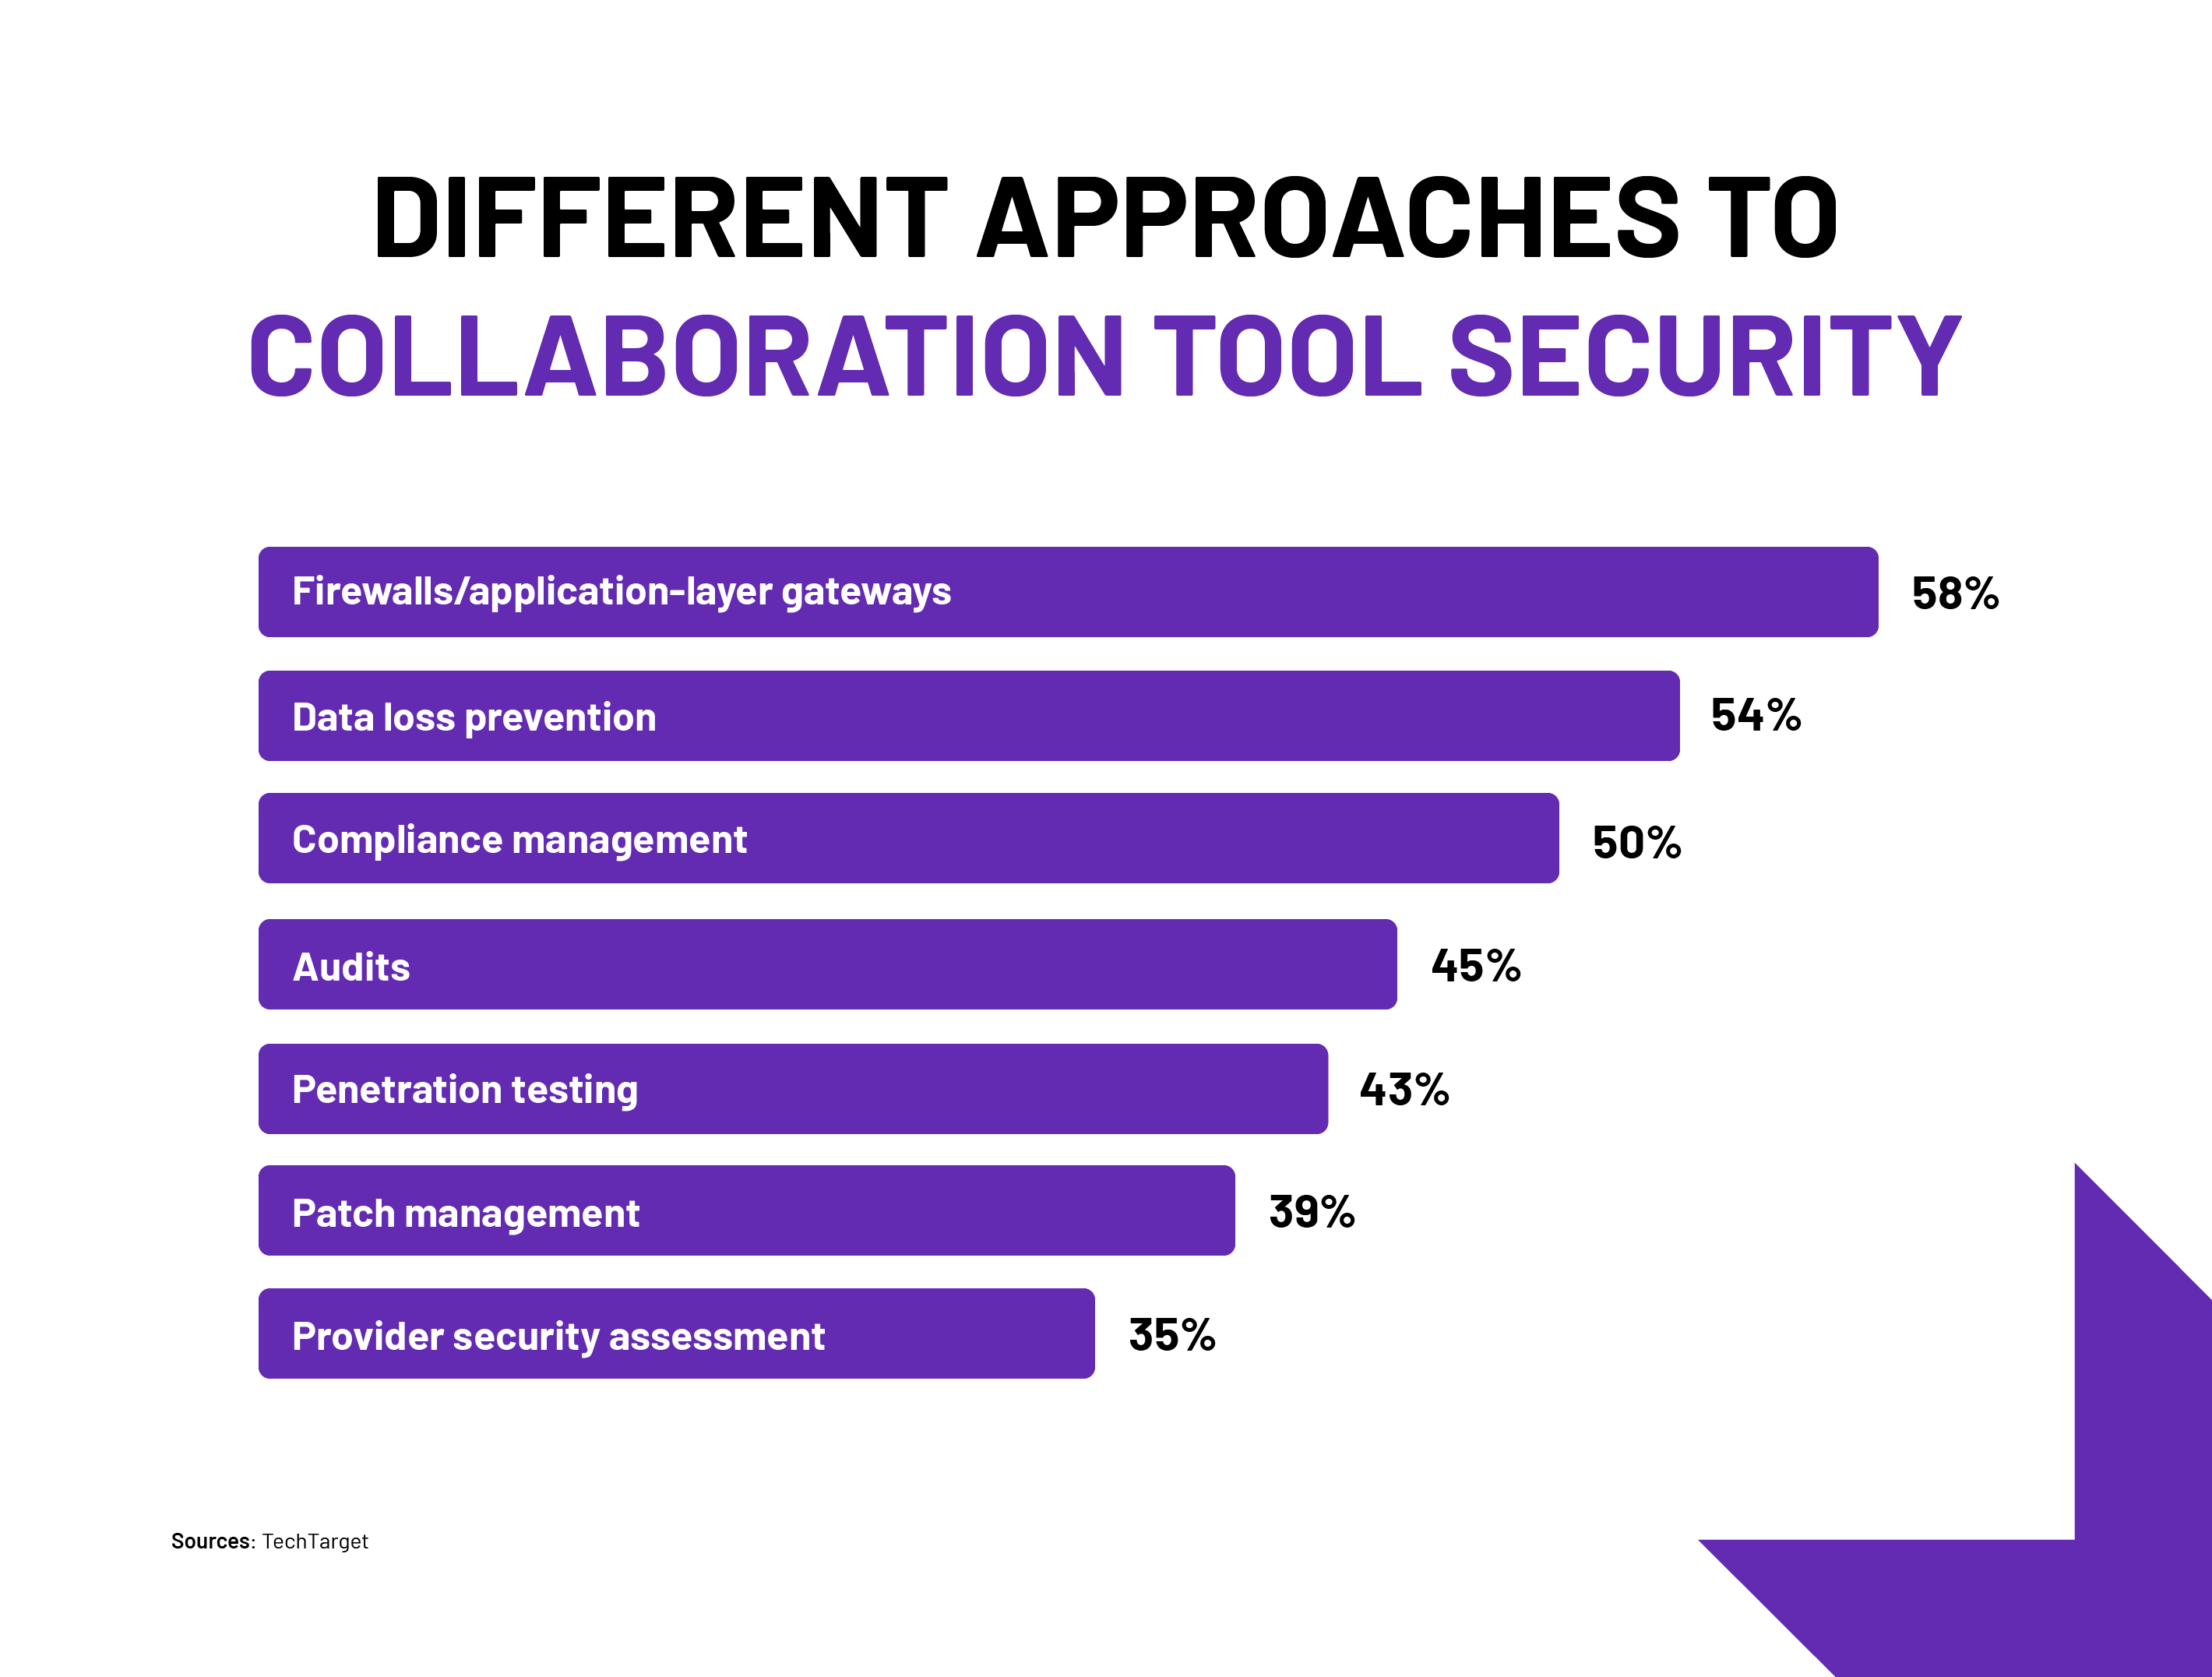 Tech.co infographic on different approaches to collaboration tool security